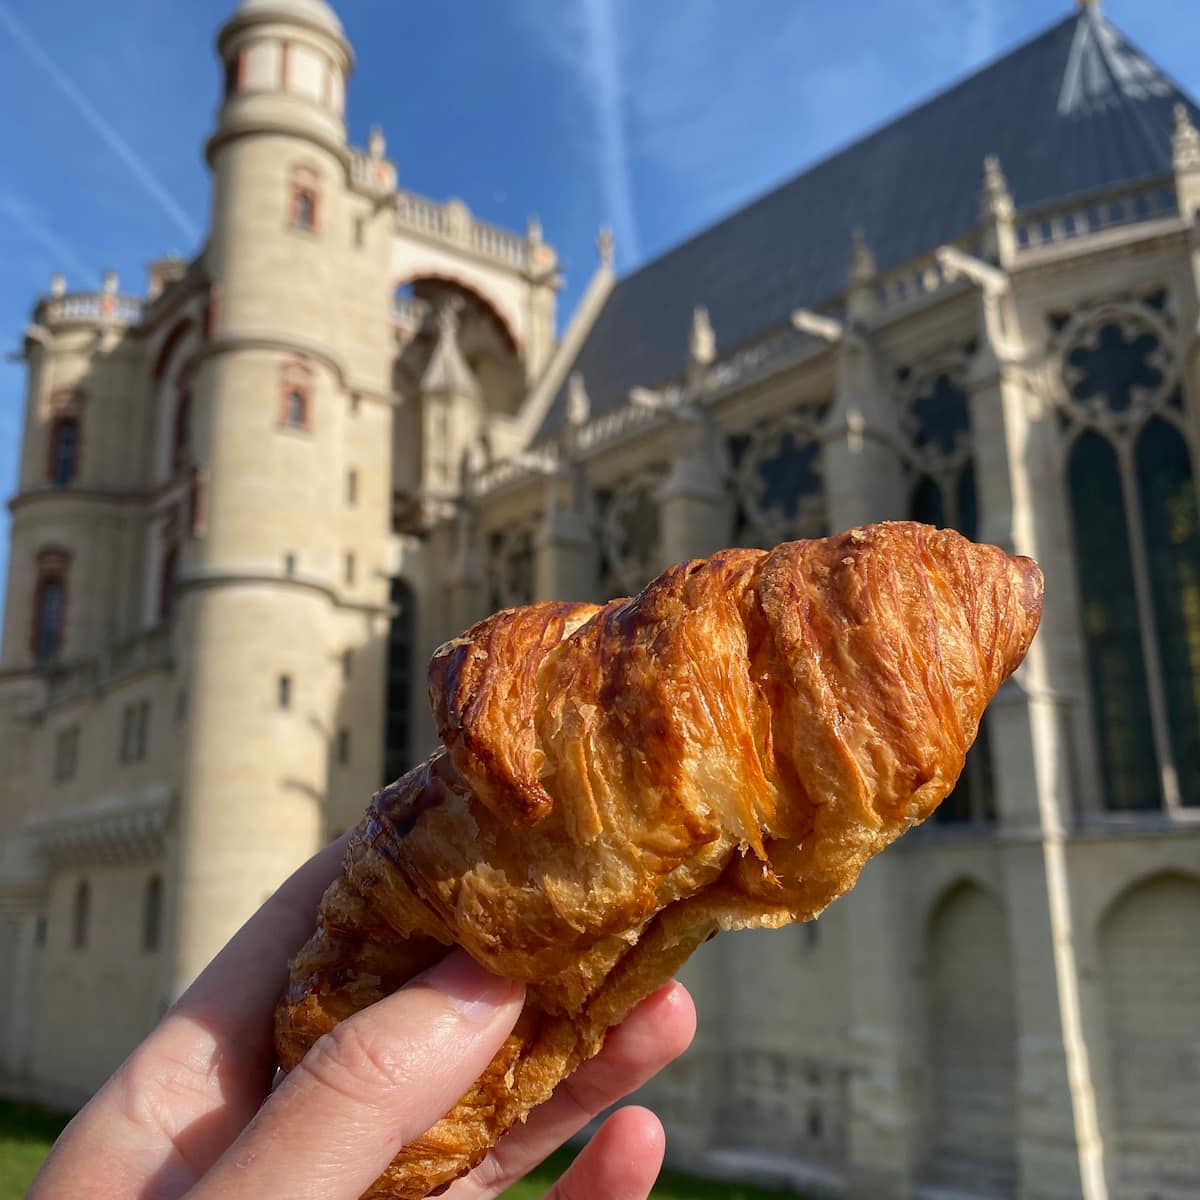 holding a croissant in front of a French castle